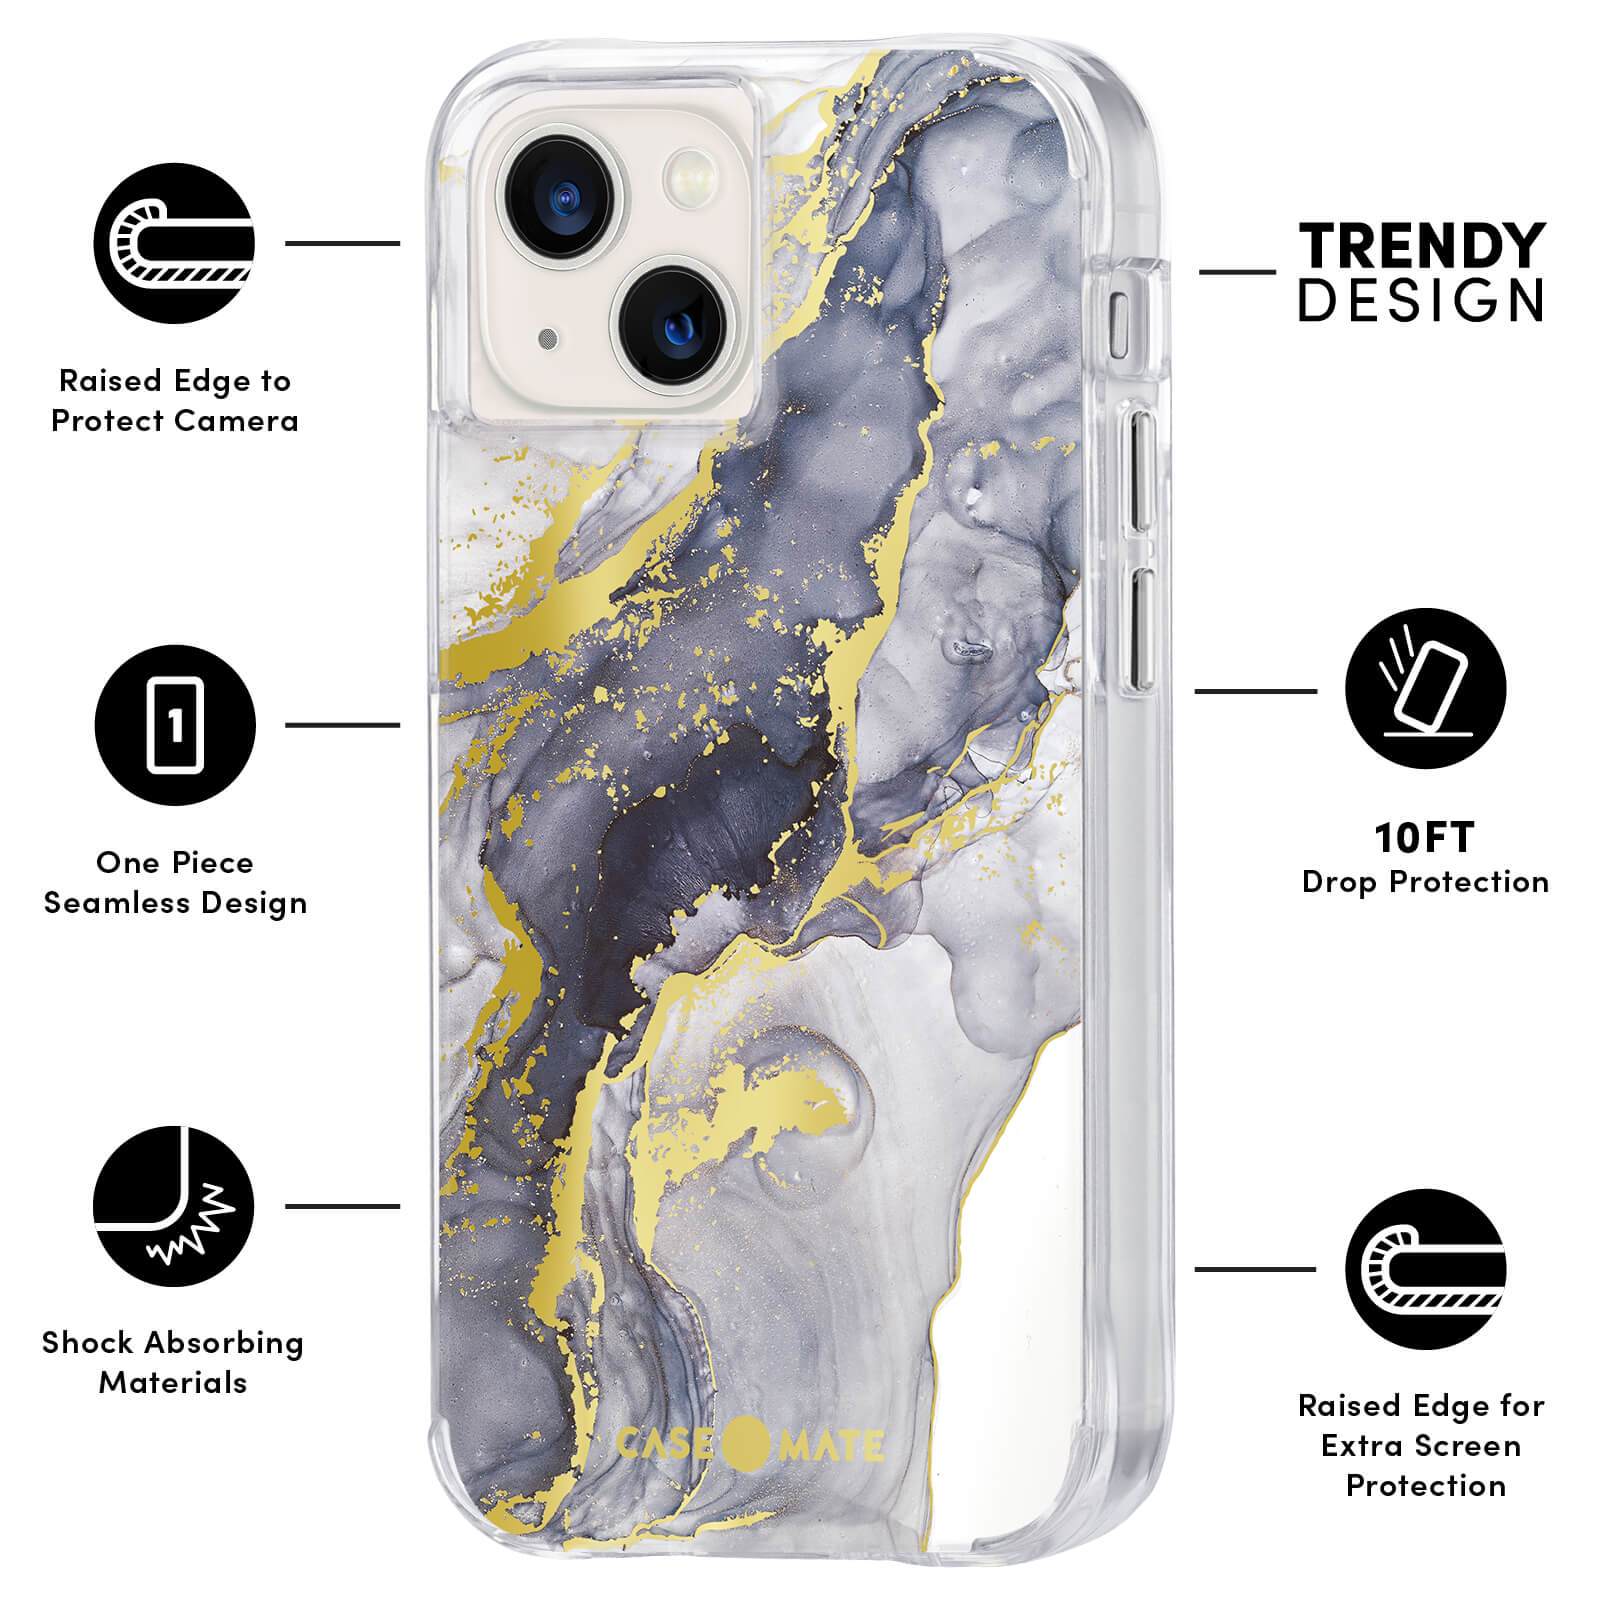 FEATURES: RAISED EDGE TO PROTECT CAMERA, ONE PIECE SEAMLESS DESIGN, SHOCK ABSORBING MATERIALS, TRENDY DESIGN, 10FT DROP PROTECTION, RAISED EDGE FOR EXTRA SCREEN PROTECTION. COLOR::NAVY MARBLE